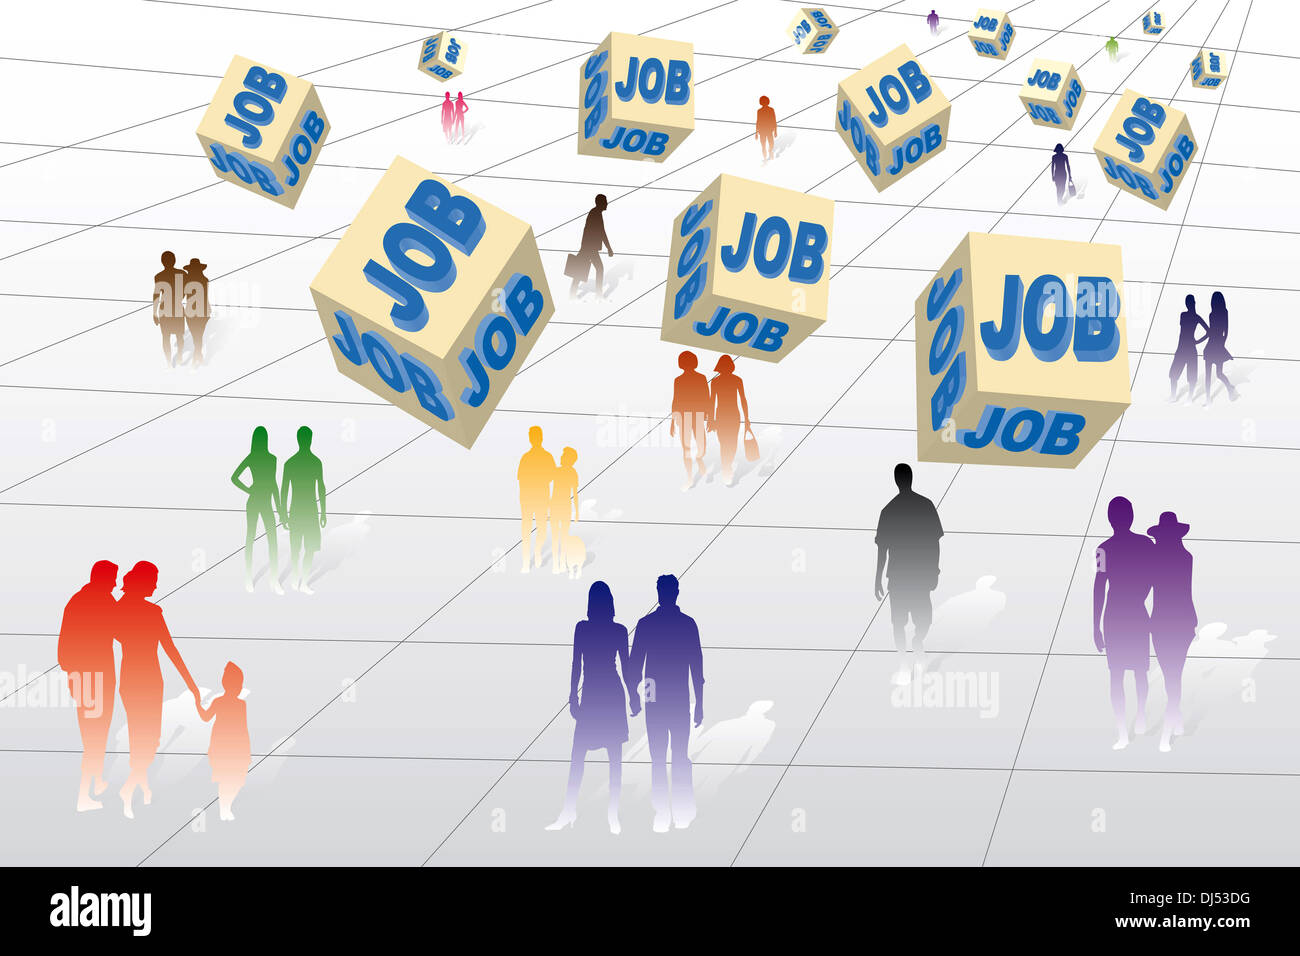 Many unemployed people looking for a job Stock Photo